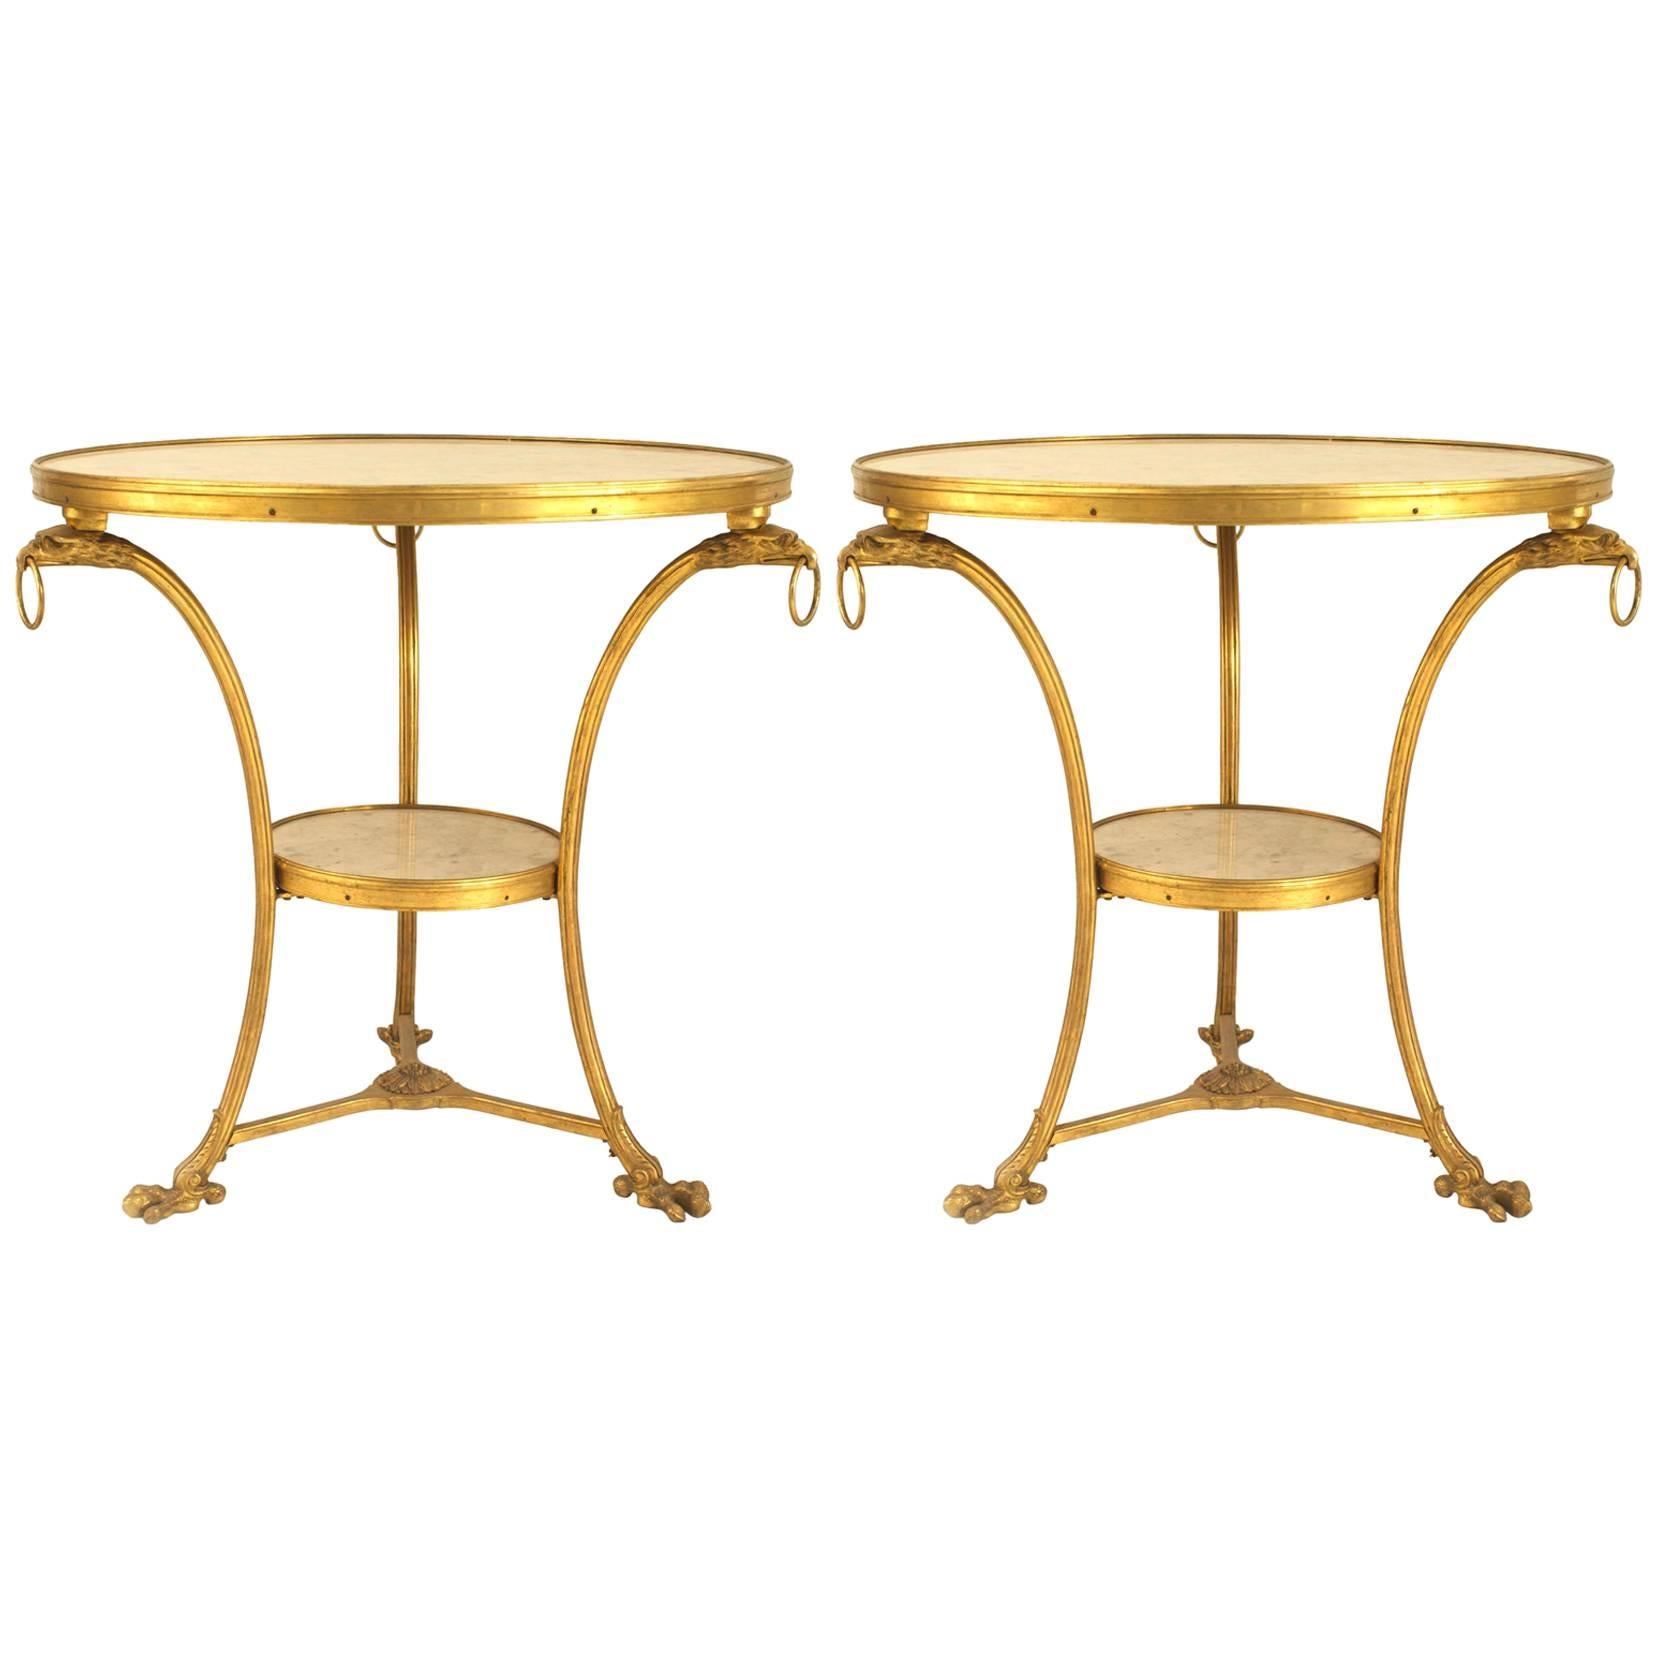 Two French Empire Style Bronze Gueridon End Tables